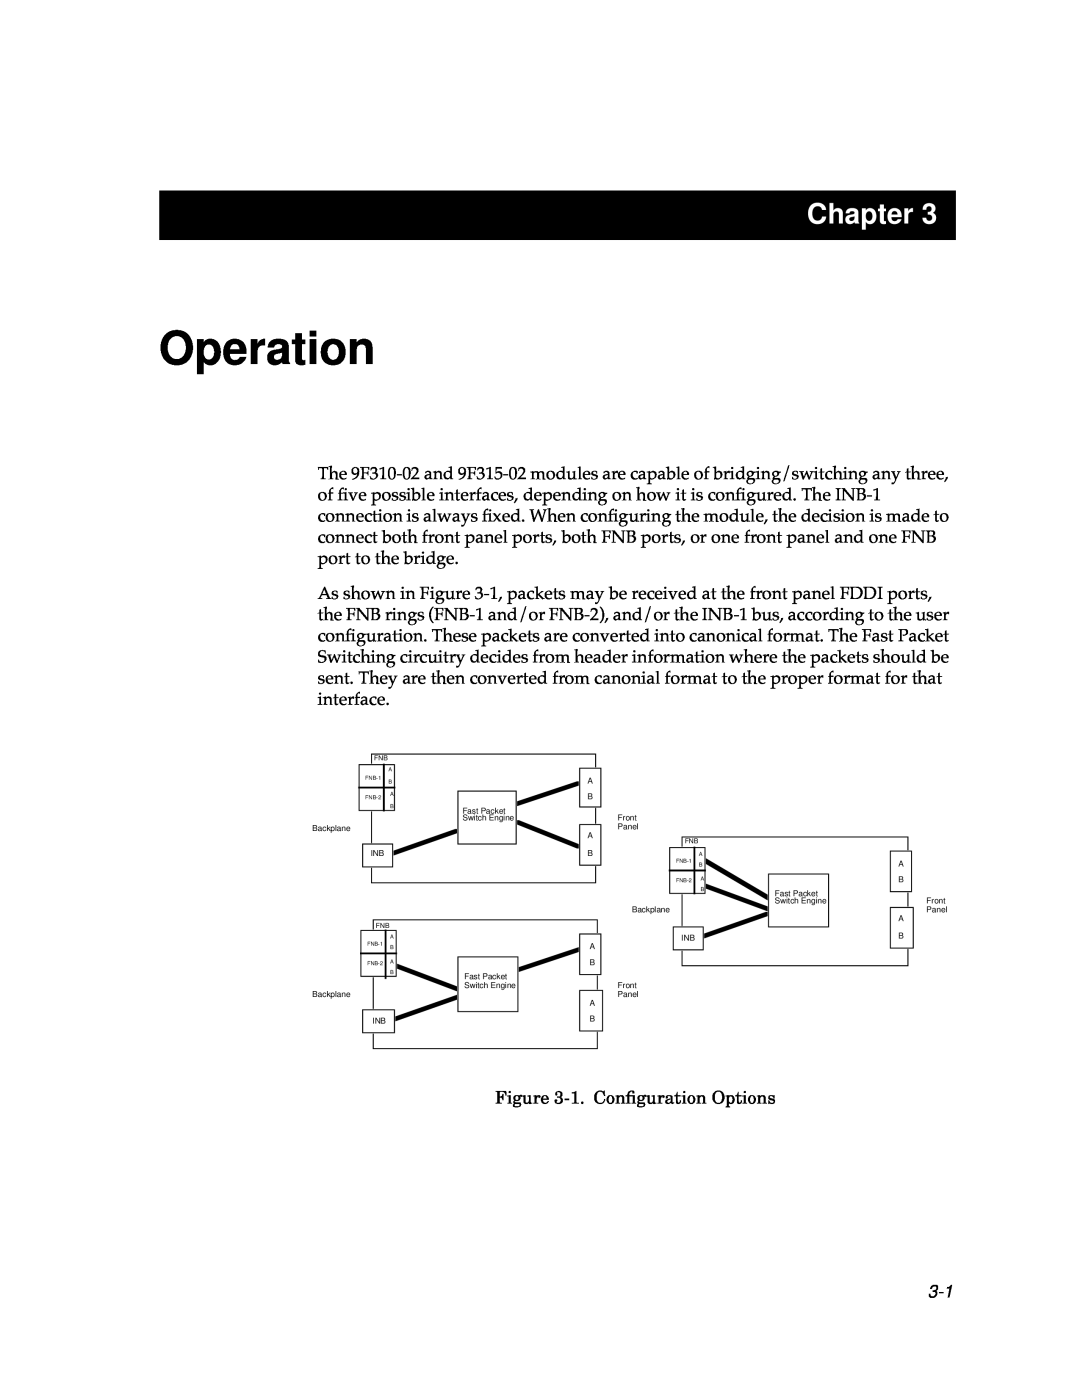 Cabletron Systems 9F315-02, 9F310-02 manual Operation, Chapter 